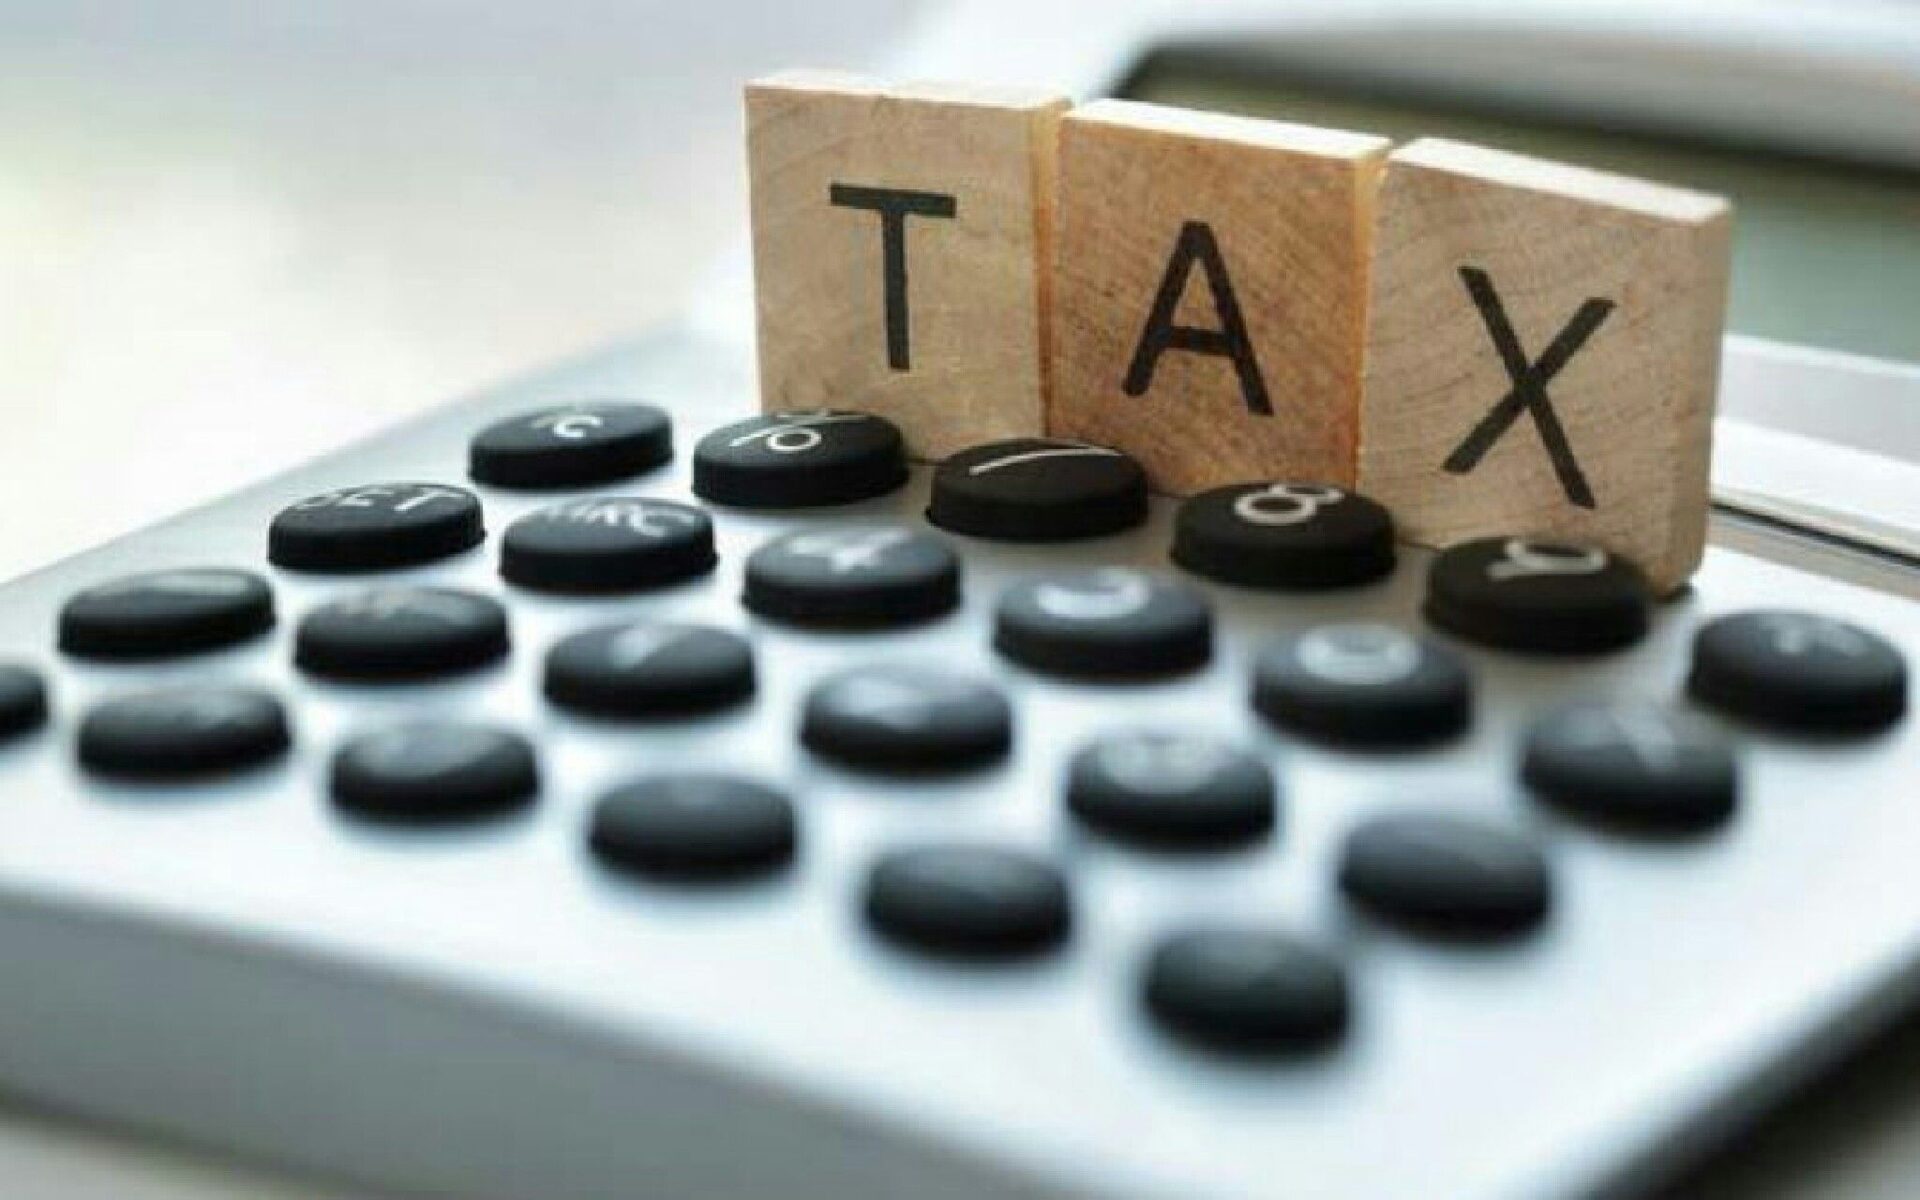 Is excise duty a tax borne or a tax collected?